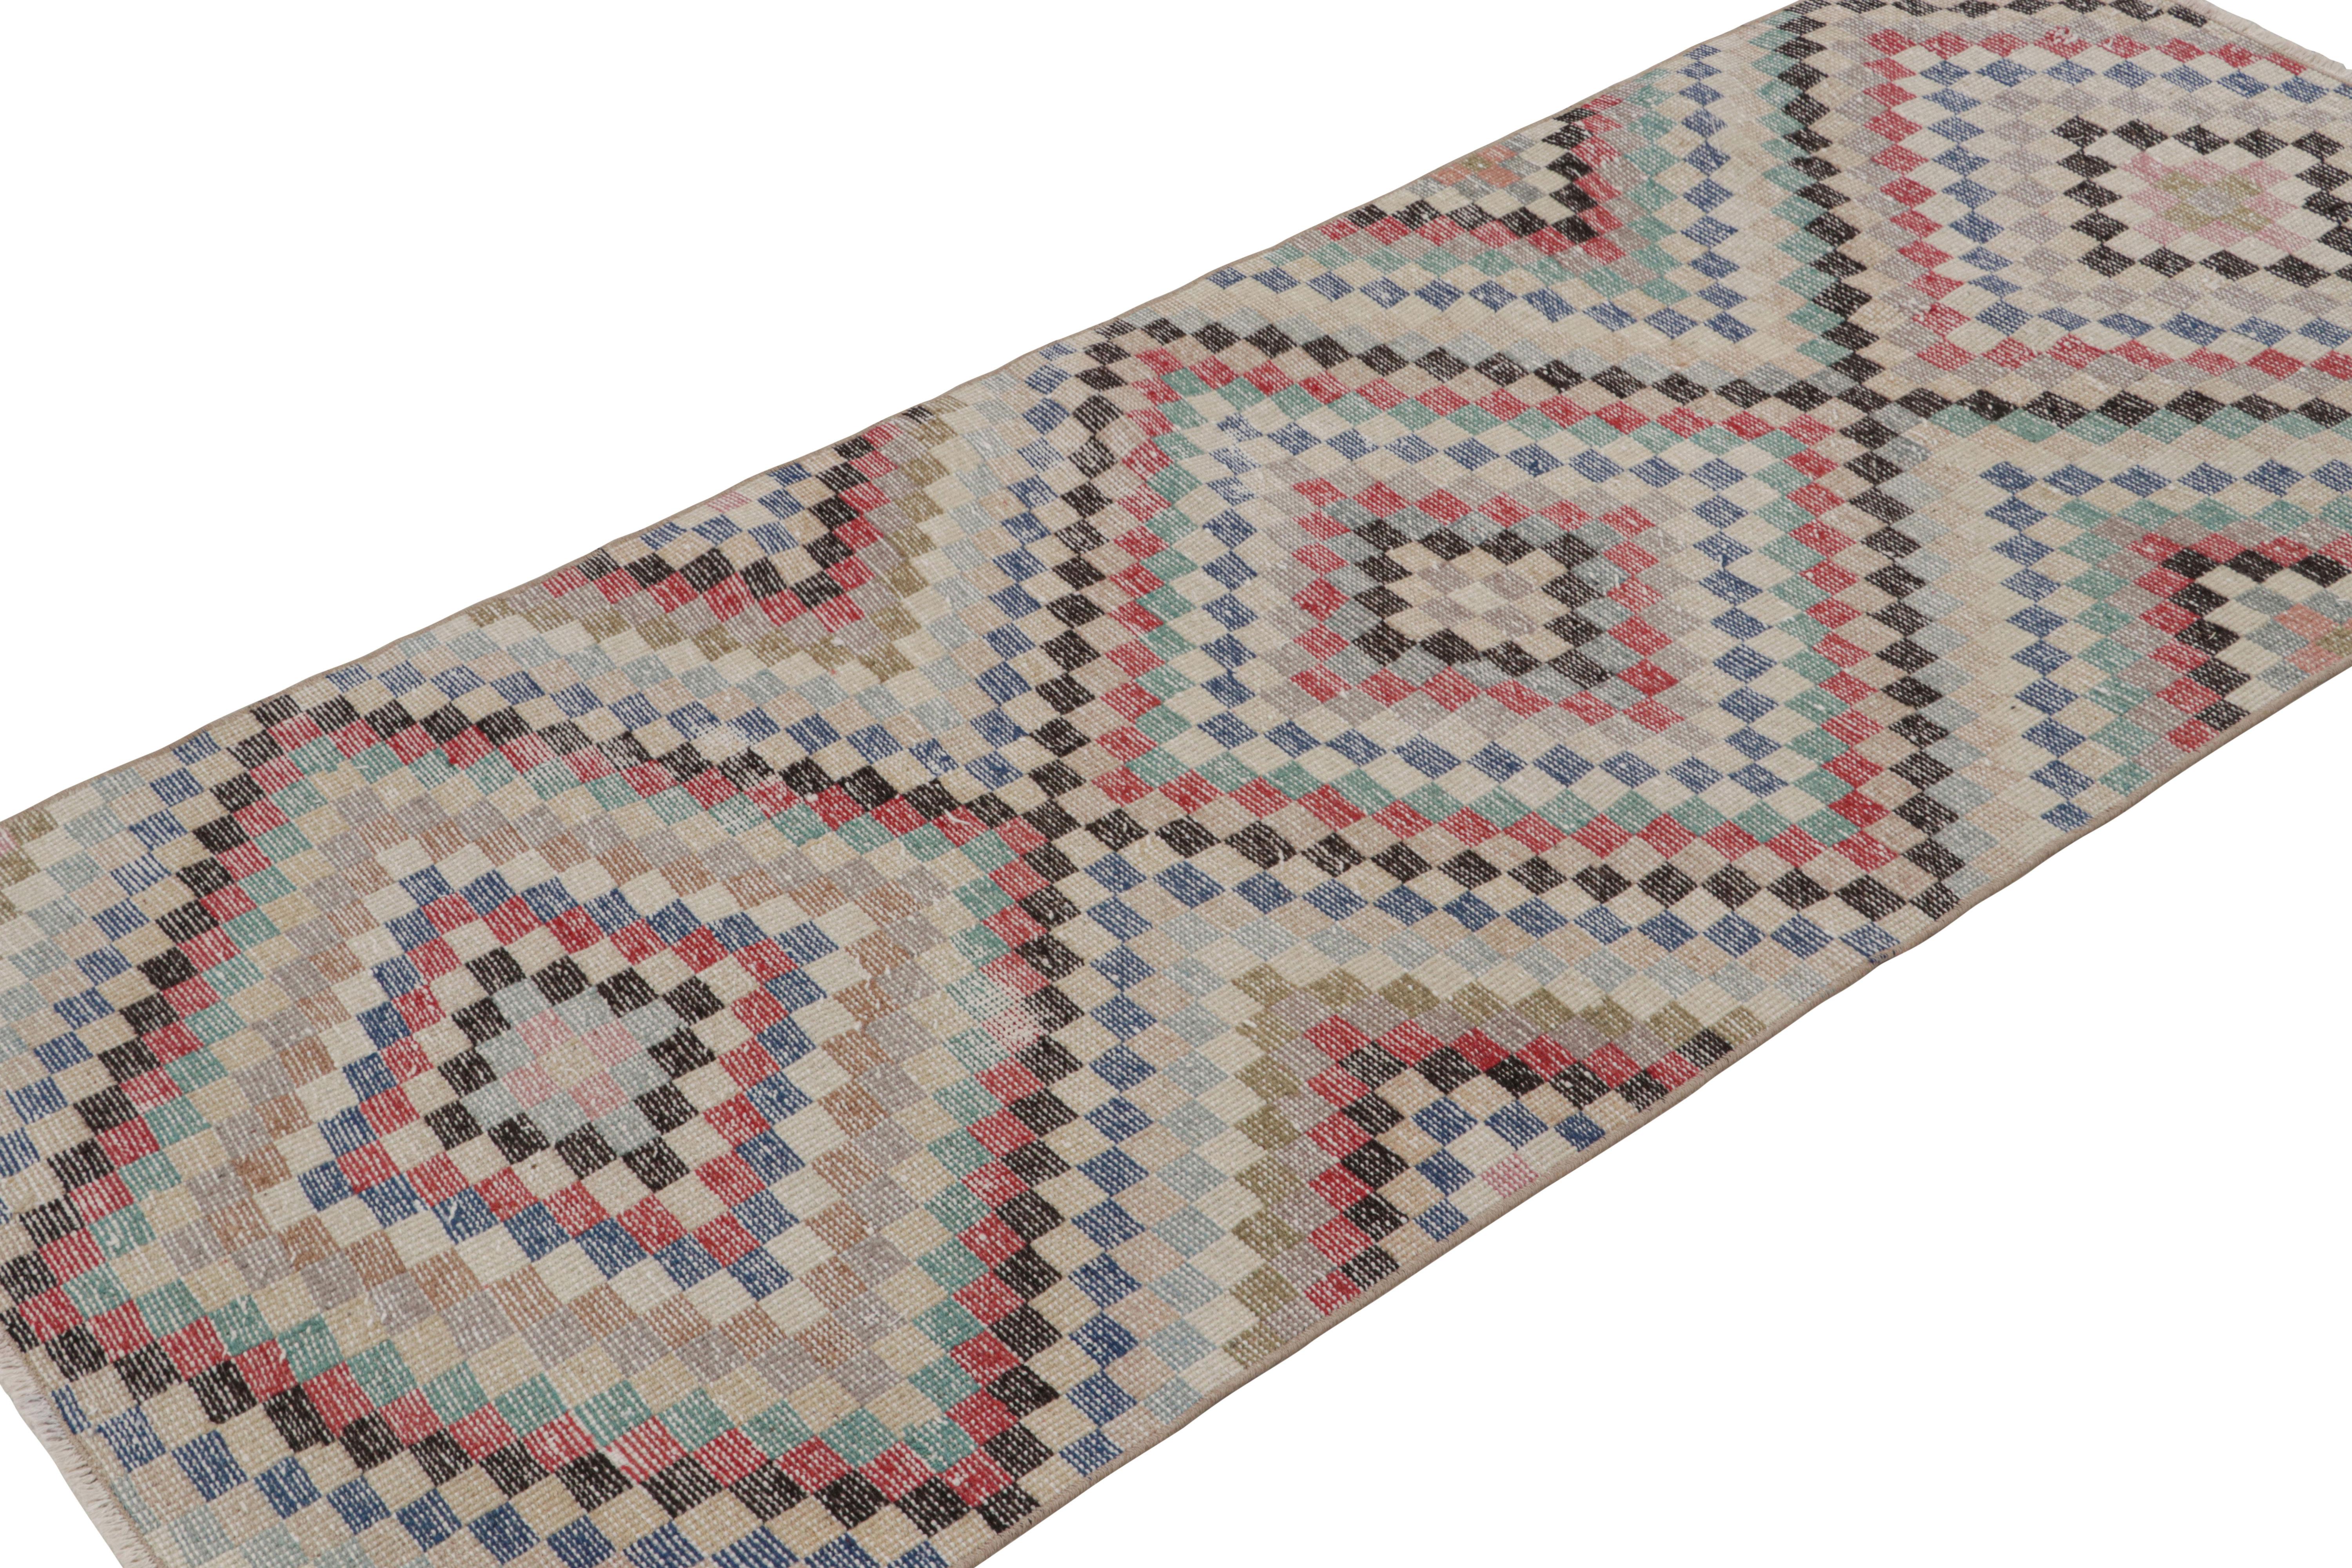 Handknotted in wool, this 3x6 vintage Art deco Zeki Múren rug originates from Turkey, circa 1960-1970 and is latest to join Rug & Kilim’s repertoire of vintage selections. 

On the Design:

Connoisseurs will admire this vintage Zeki Múren’s design